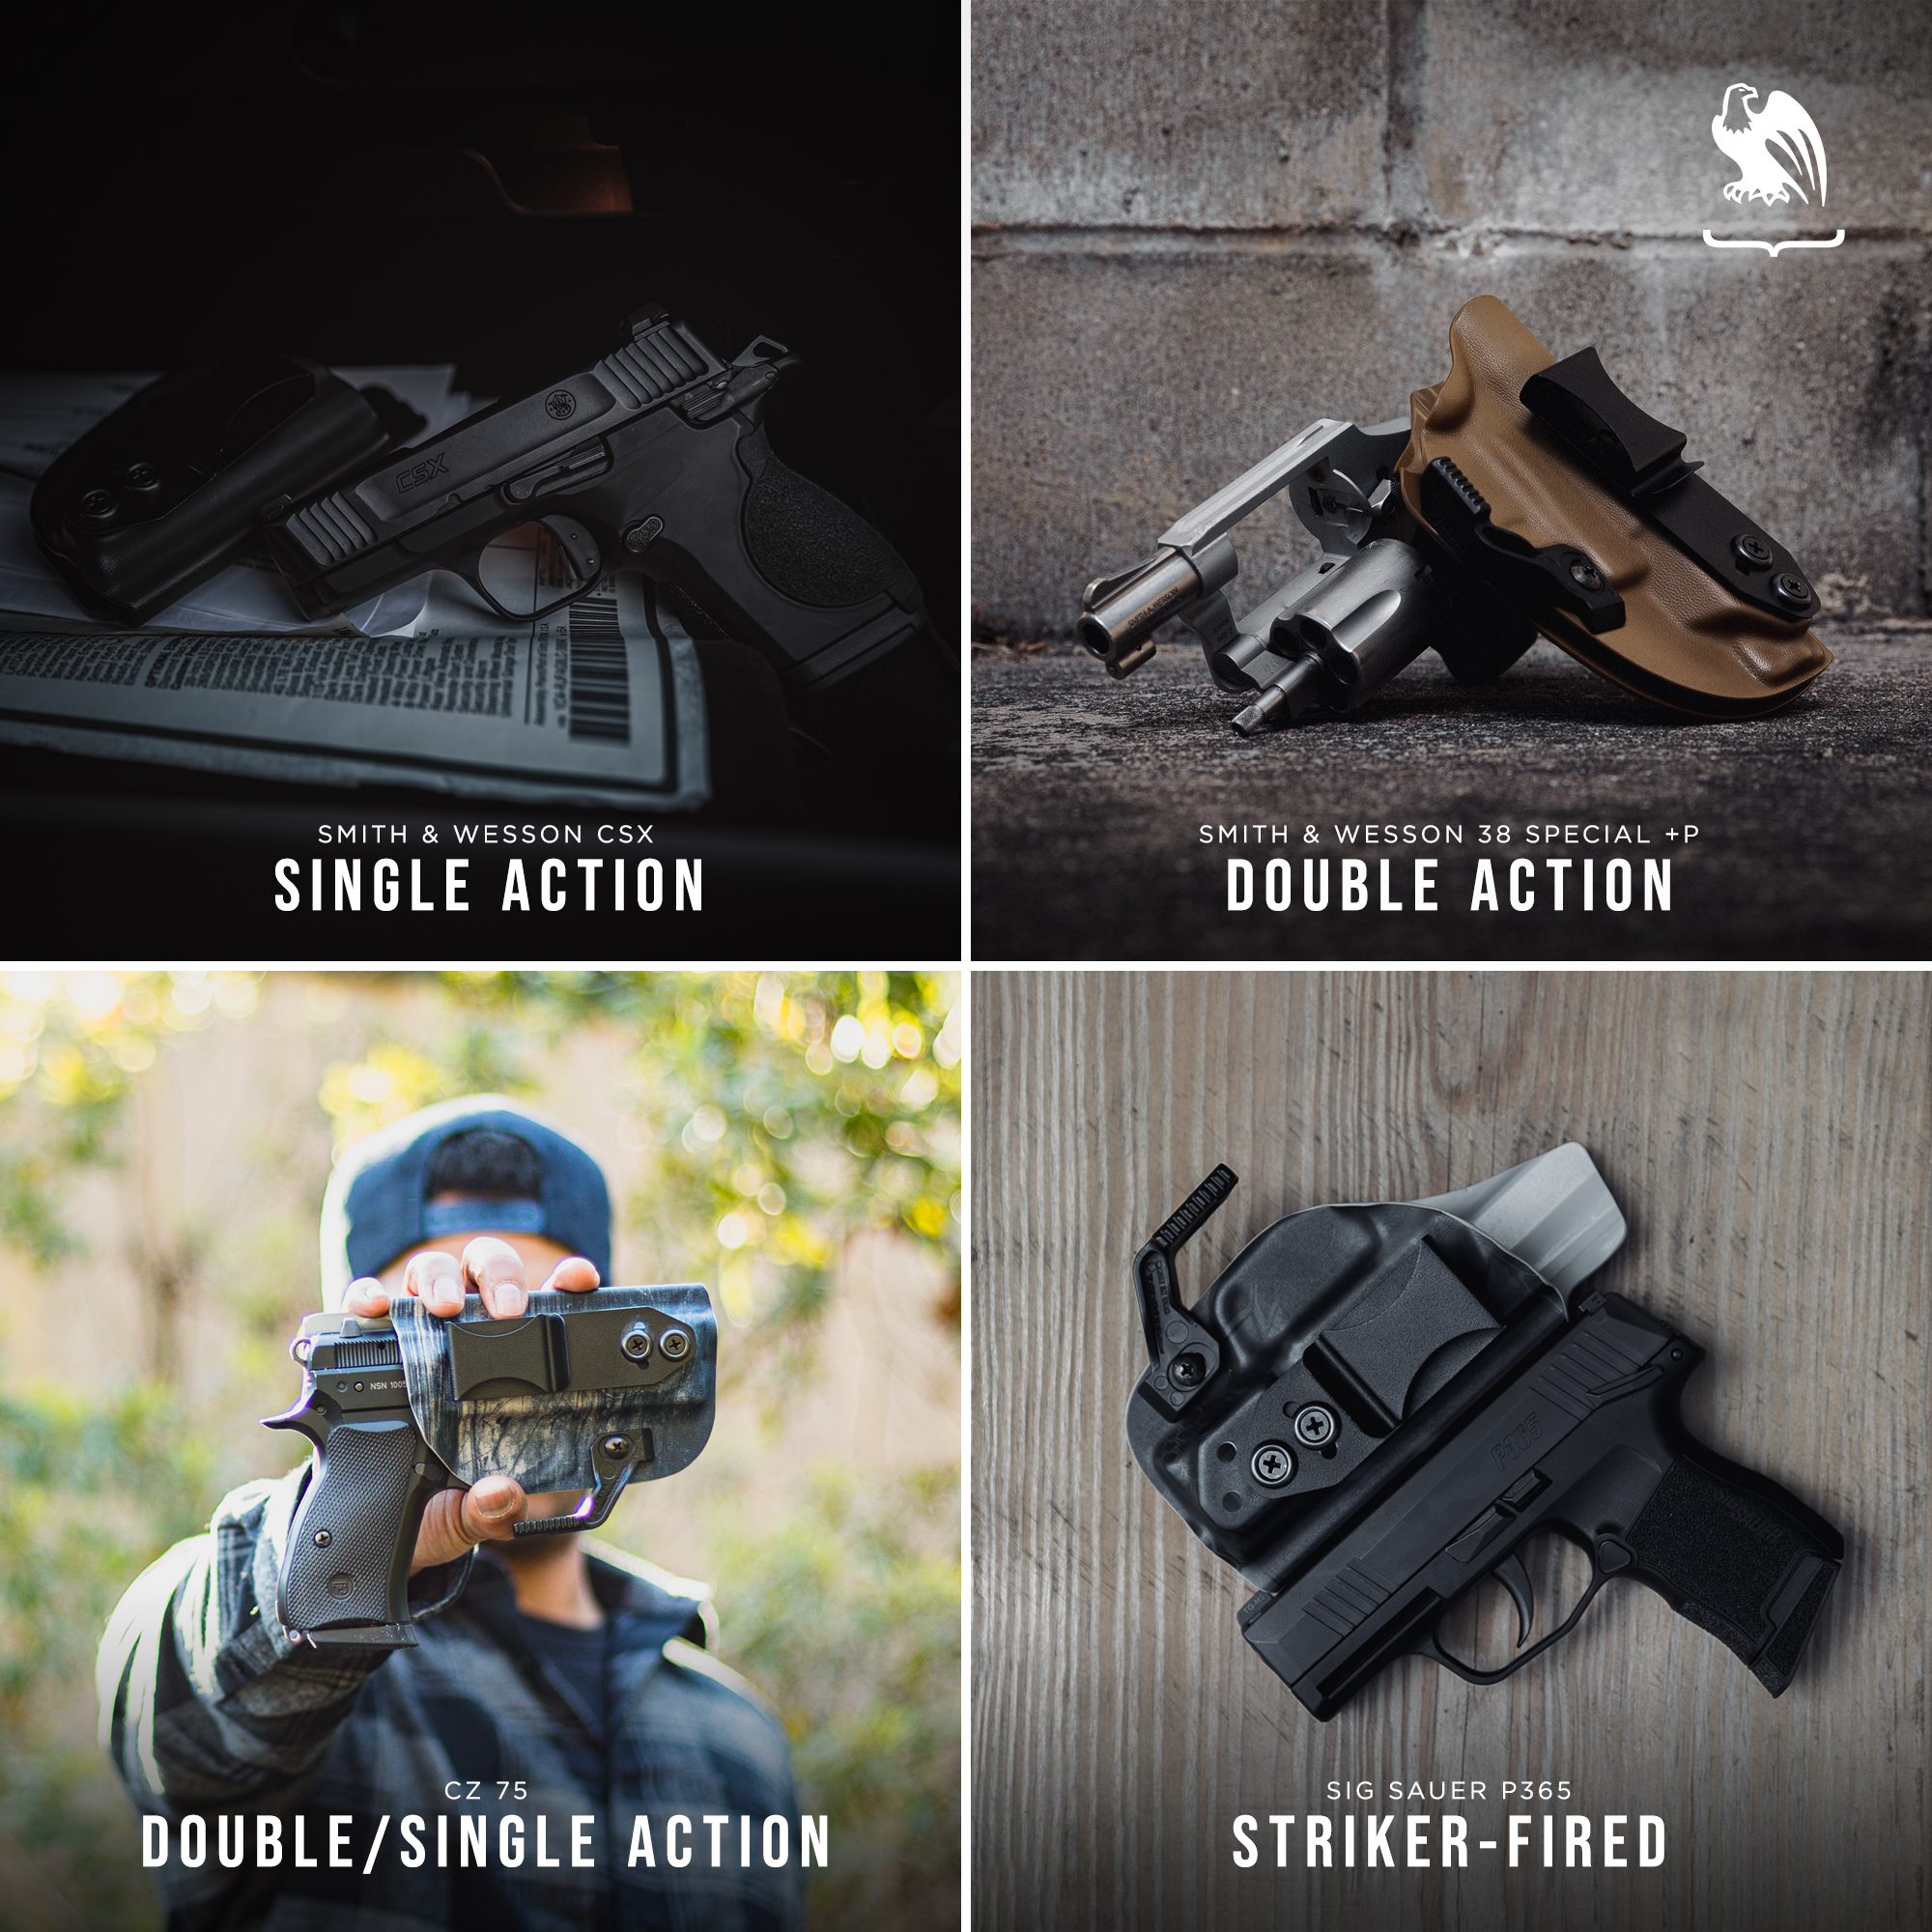 Types of Triggers - Single Action, Double Action, Double/Single Action and Striker-Fired